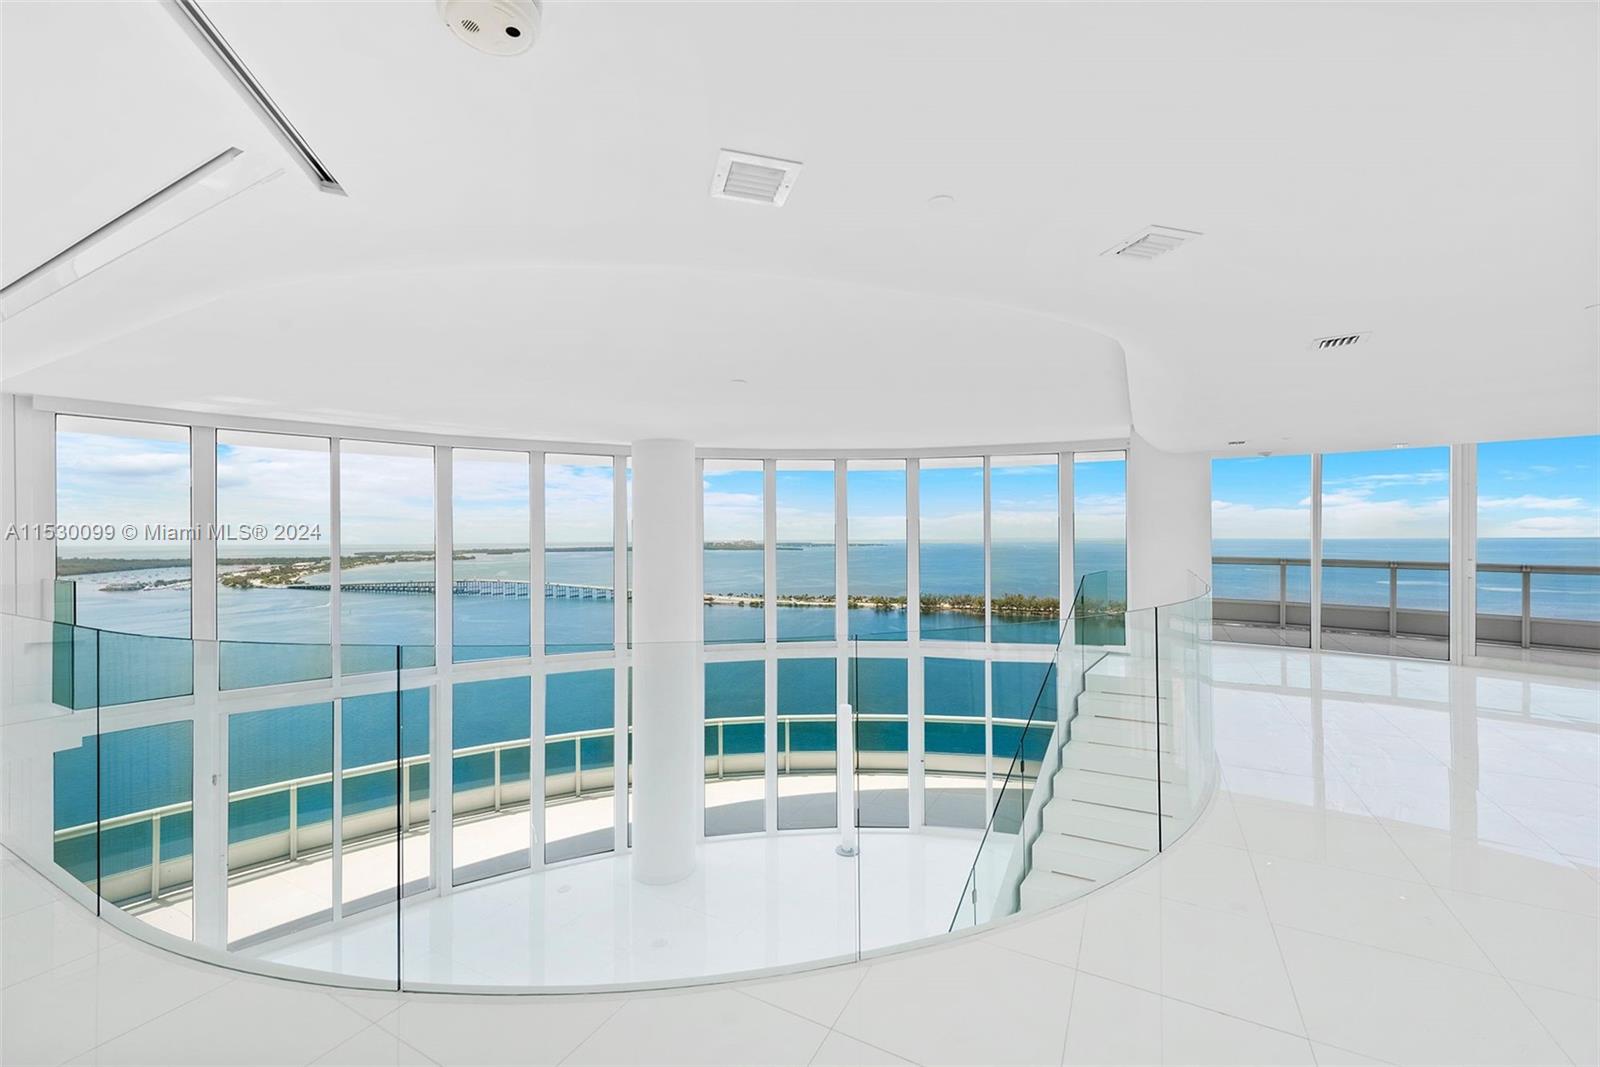 Breathtaking unobstructed views of the Bay and Ocean greet you as you step into this dramatic 2 story Townhouse on the 39th and 40th floors. 5,730 sq ft interiors were totally redesigned by a renowned architect and feature contemporary sleek finishes such as white glass 36&quot;x36&quot; flooring throughout, customized bathrooms, walk-in closets, designer doors, soffits and fixtures, motorized shades. An open kitchen with sliding frosted glass doors that open up to the spacious living room with 20 ft ceilings and a sweeping staircase. Architectural details and refined craftsmanship convey a sense of elegance and glamour coupled with unsurpassed relaxation. Santa Maria offers 5 star amenities, a fitness center, restaurant, heated pool, lighted tennis court, marina access and 24 hour security.